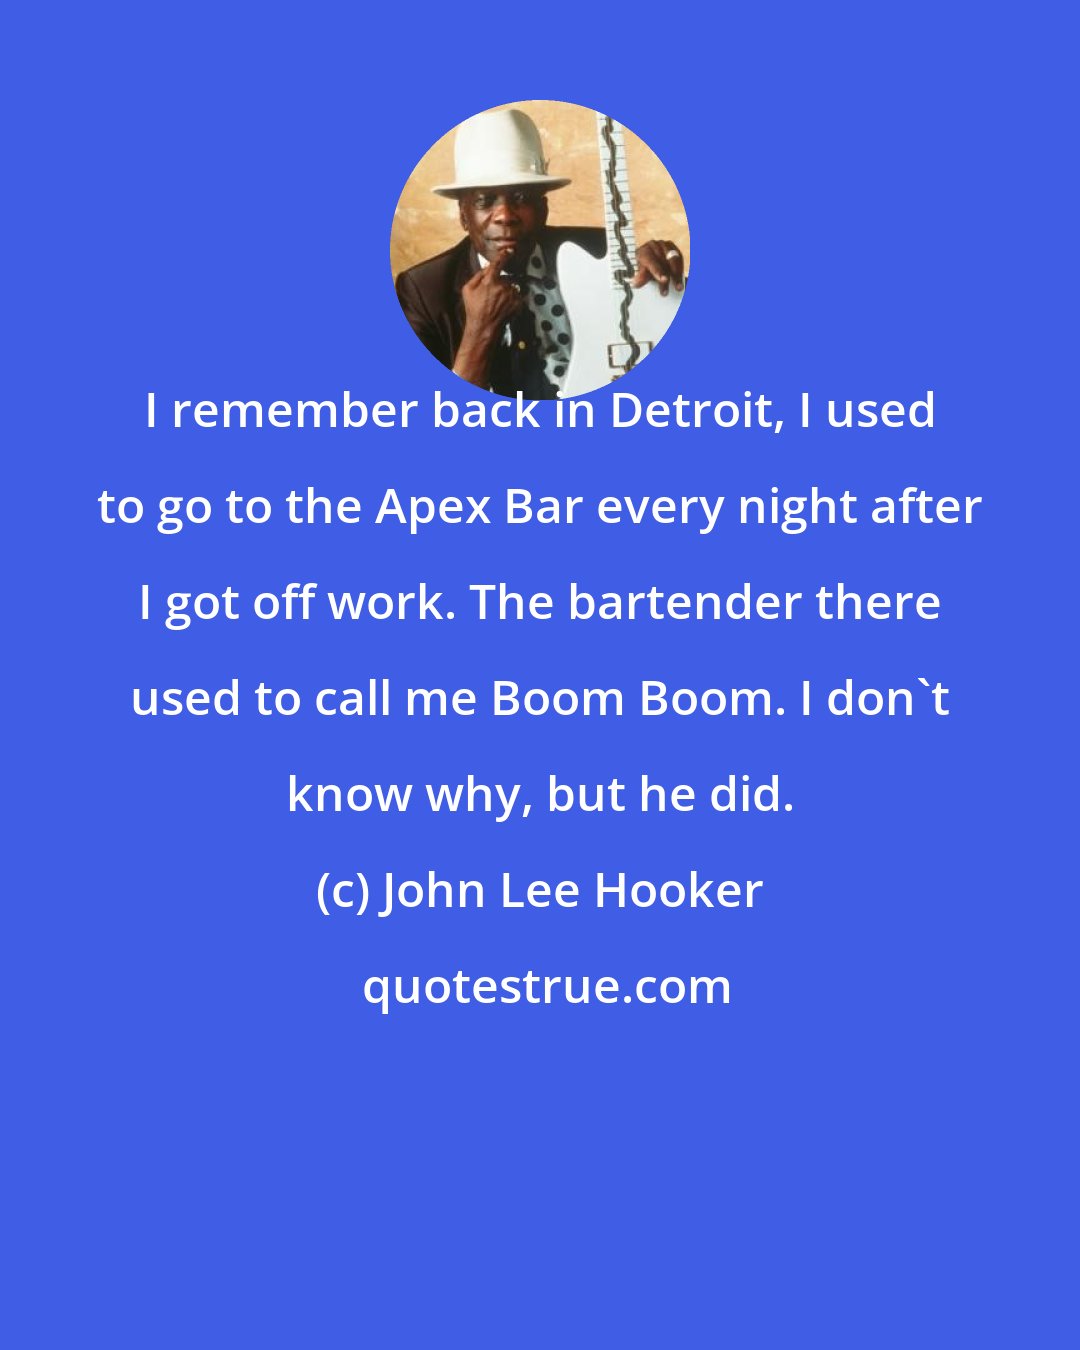 John Lee Hooker: I remember back in Detroit, I used to go to the Apex Bar every night after I got off work. The bartender there used to call me Boom Boom. I don't know why, but he did.